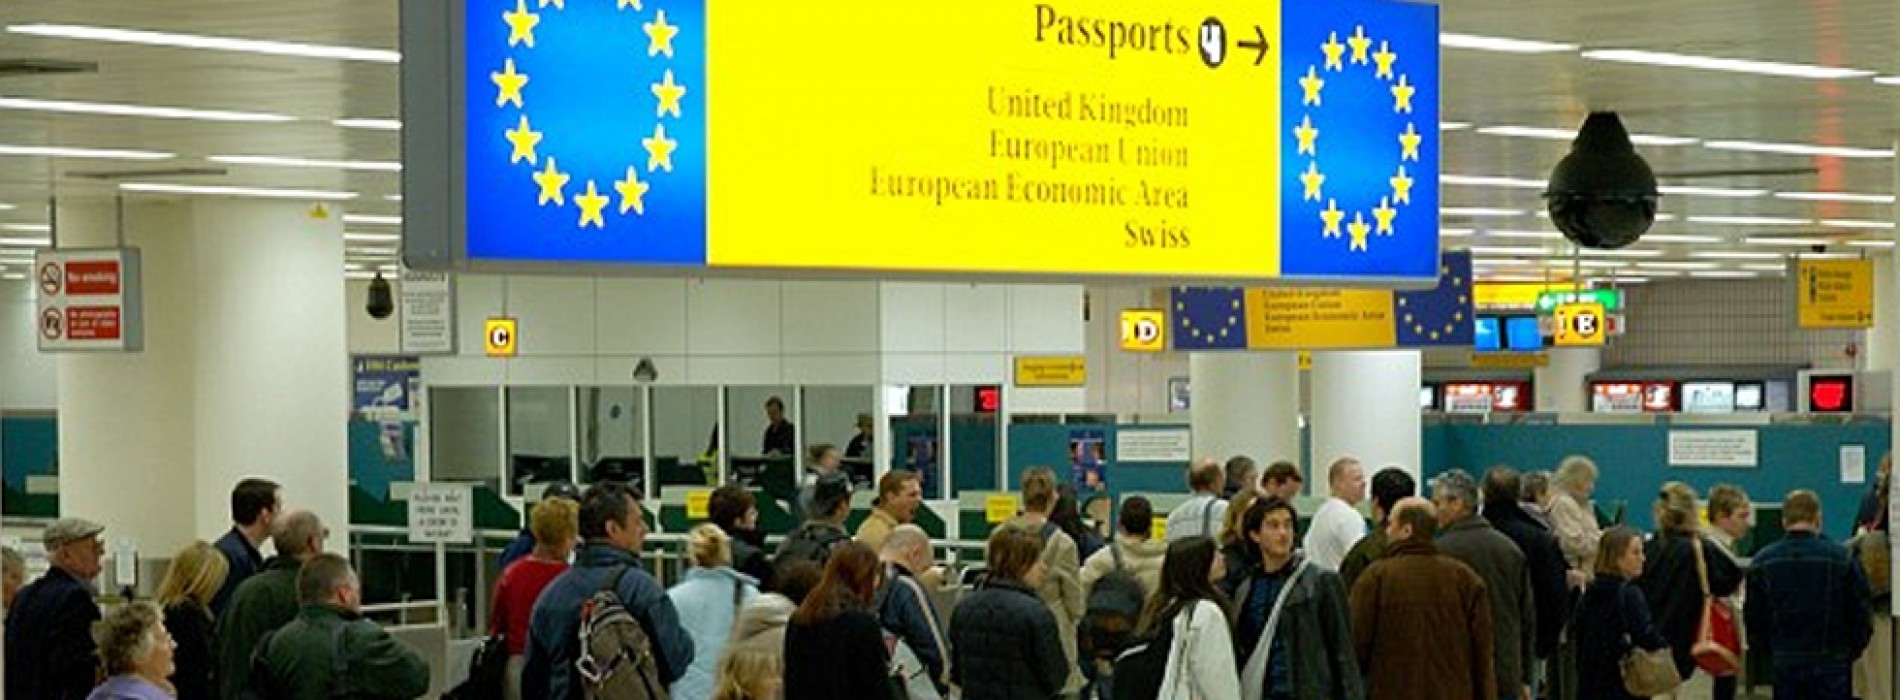 UK considers visa-free travel for citizens of EU after Brexit